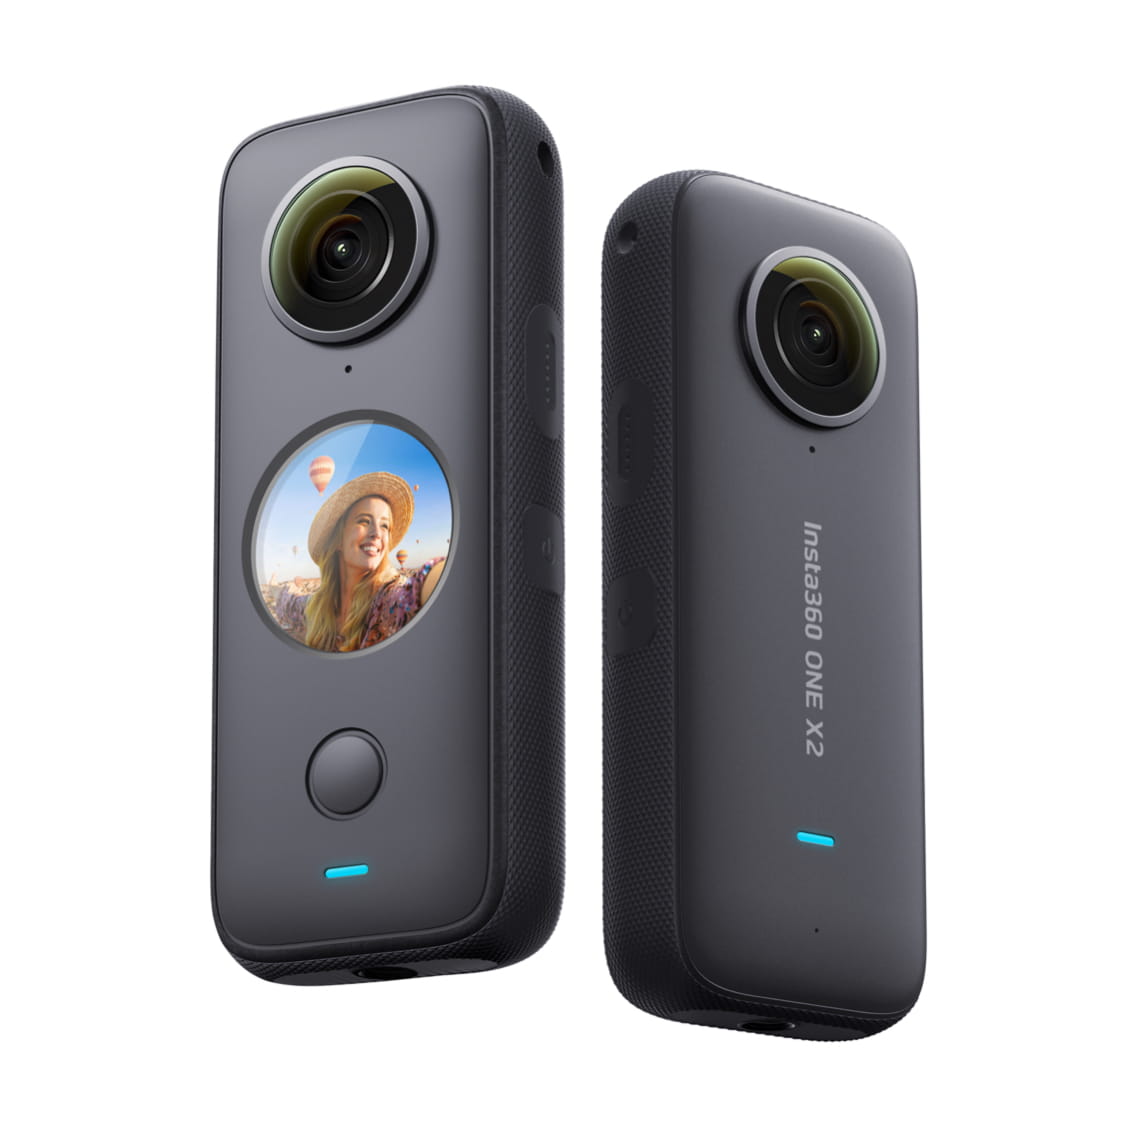 Raad Rood laden Insta360 ONE X2 – Waterproof 360 Action Camera with Stabilization